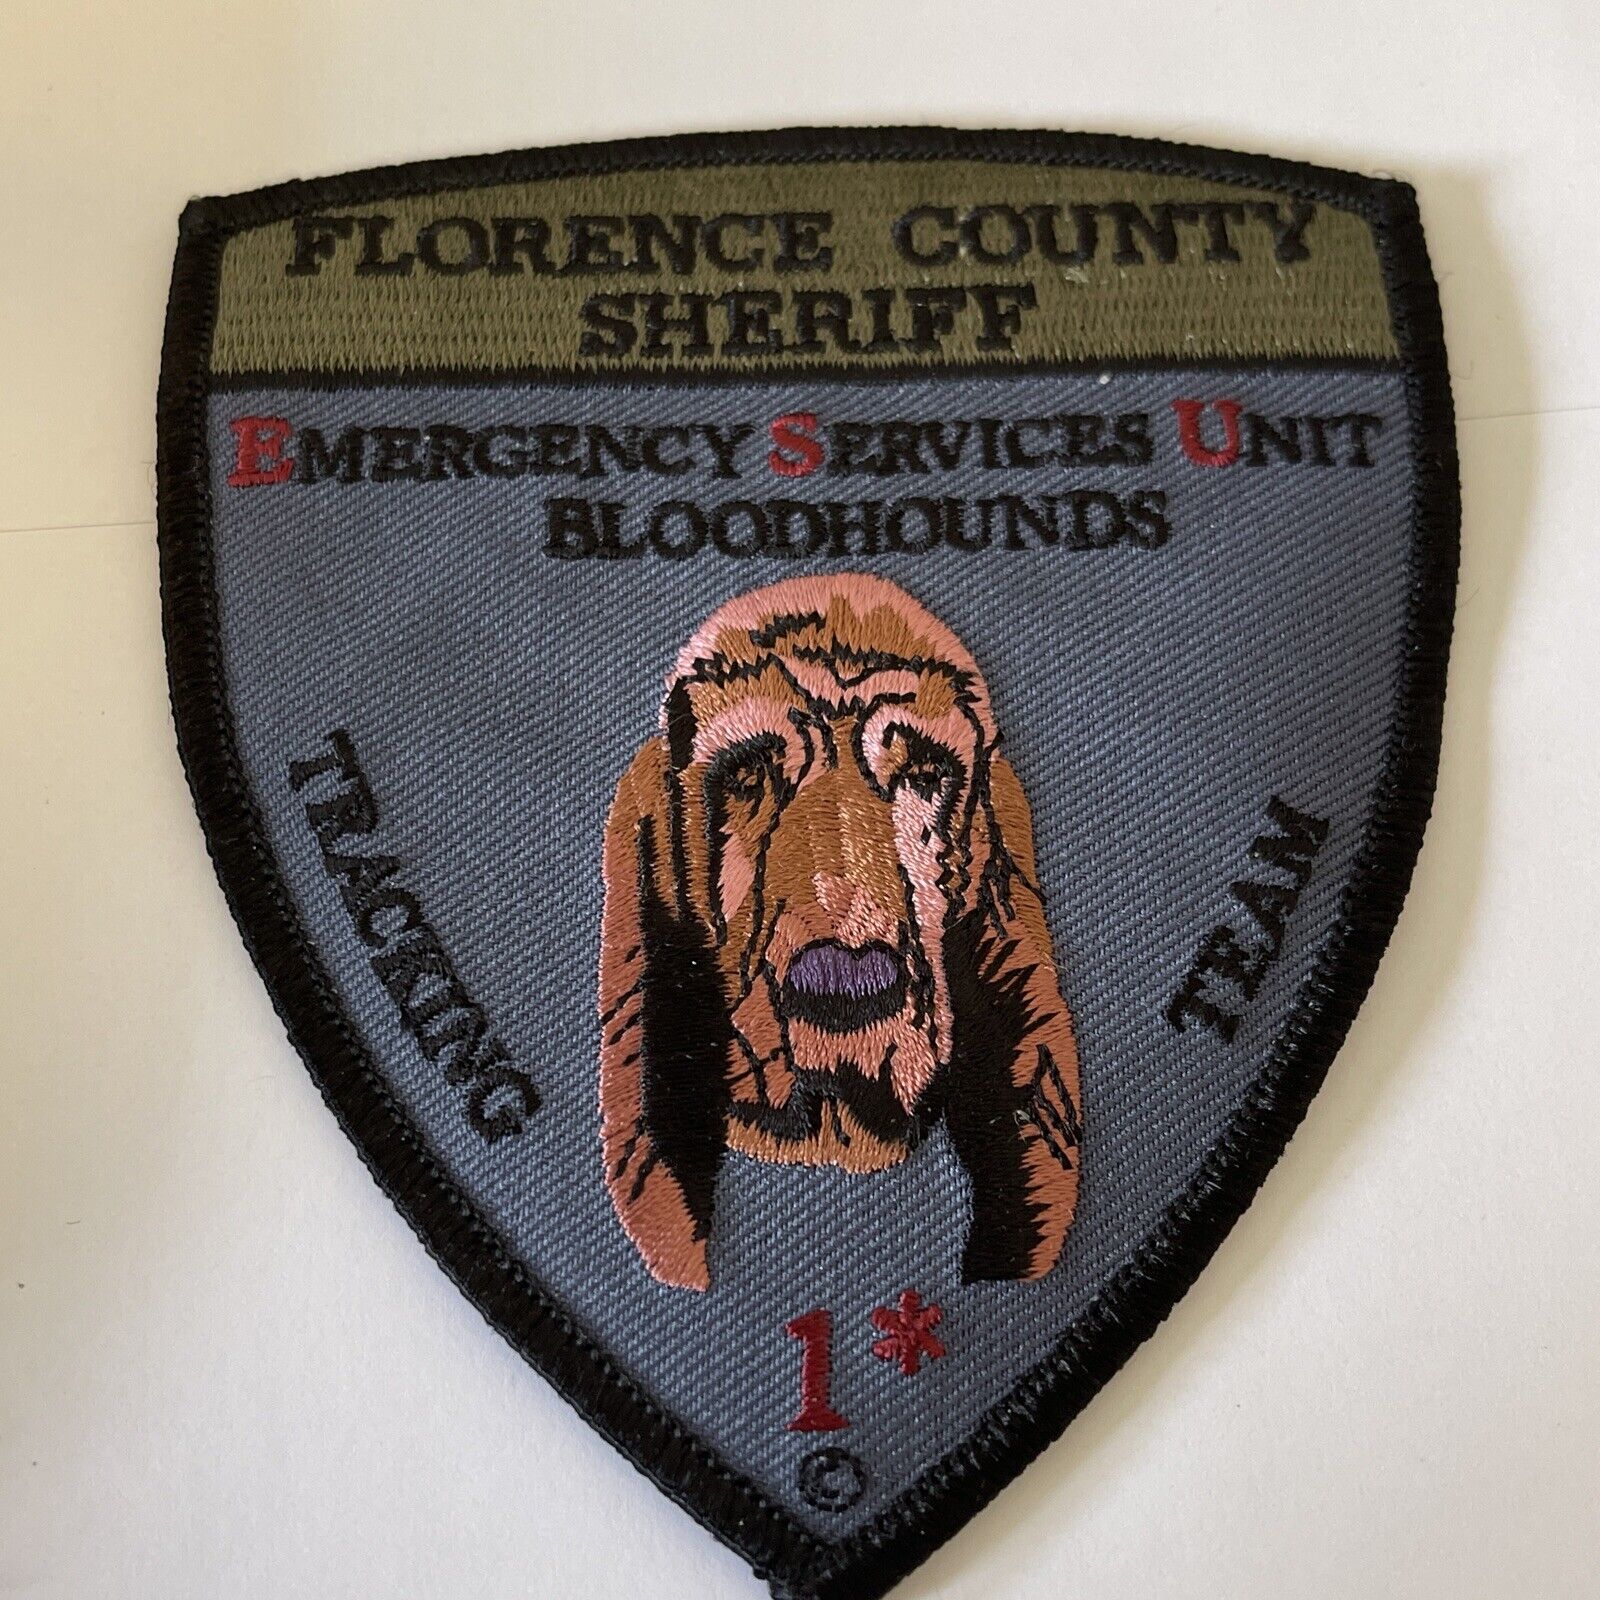 Florence county sheriff police bloodhound tracking team patch OBSOLETE BLUE